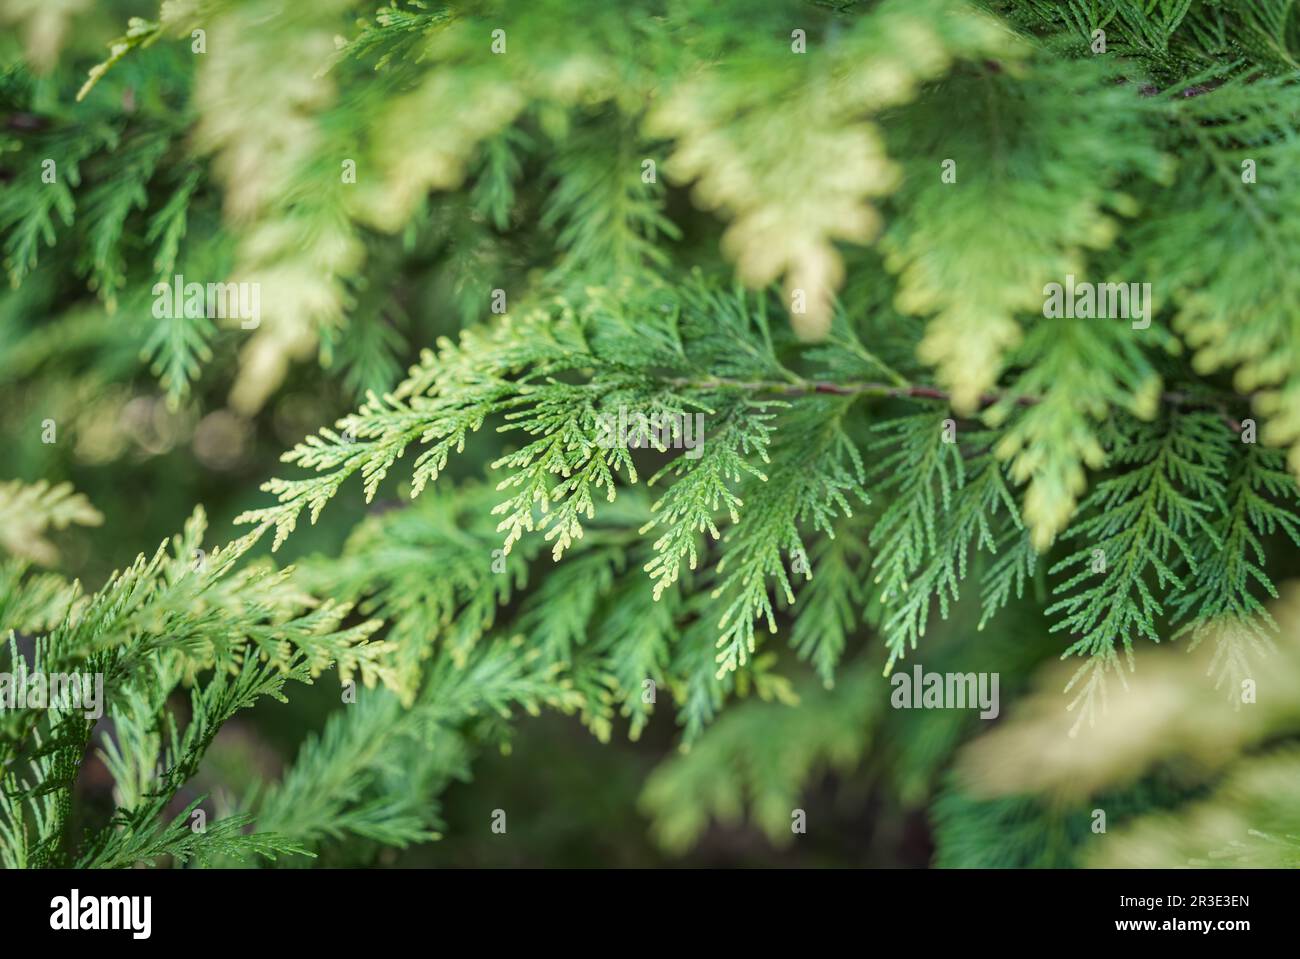 Close up detail with the green fresh foliage of Chamaecyparis lawsoniana, known as Port Orford cedar or Lawson cypress plant Stock Photo